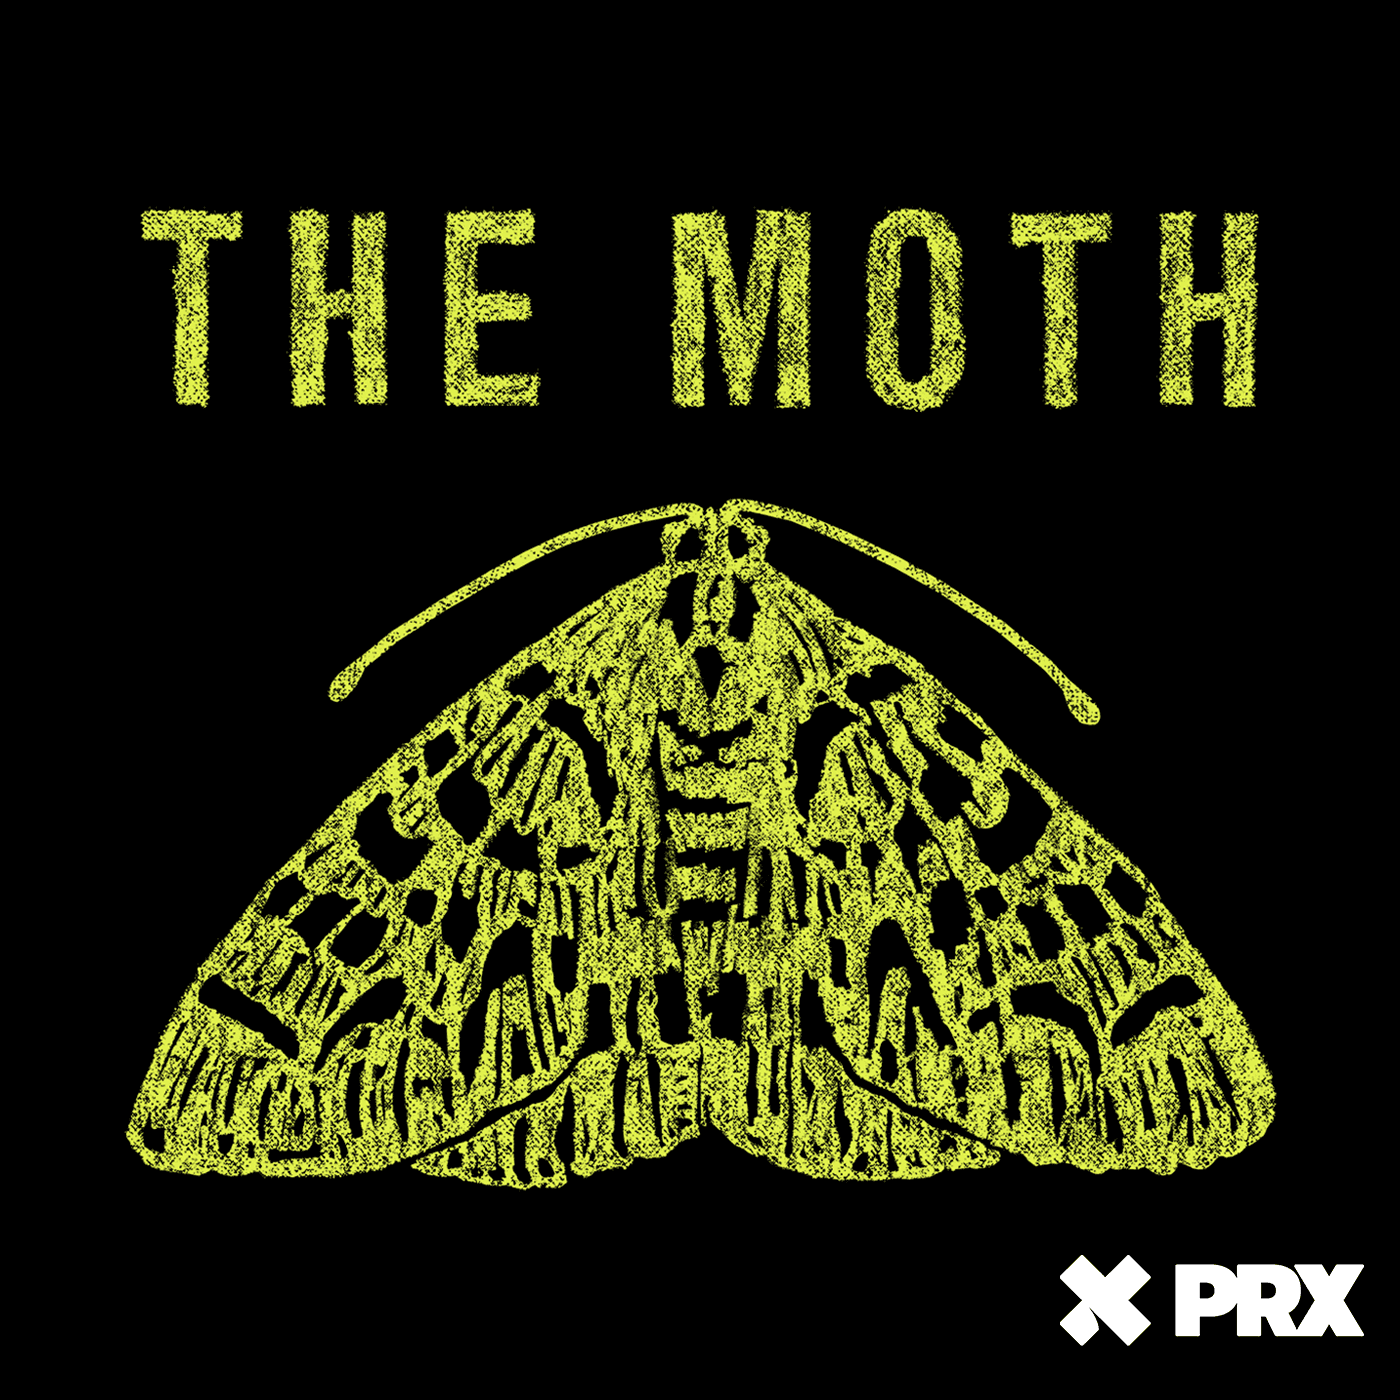 Thumbnail for "The Moth Radio Hour: Everything's Bigger in Texas".